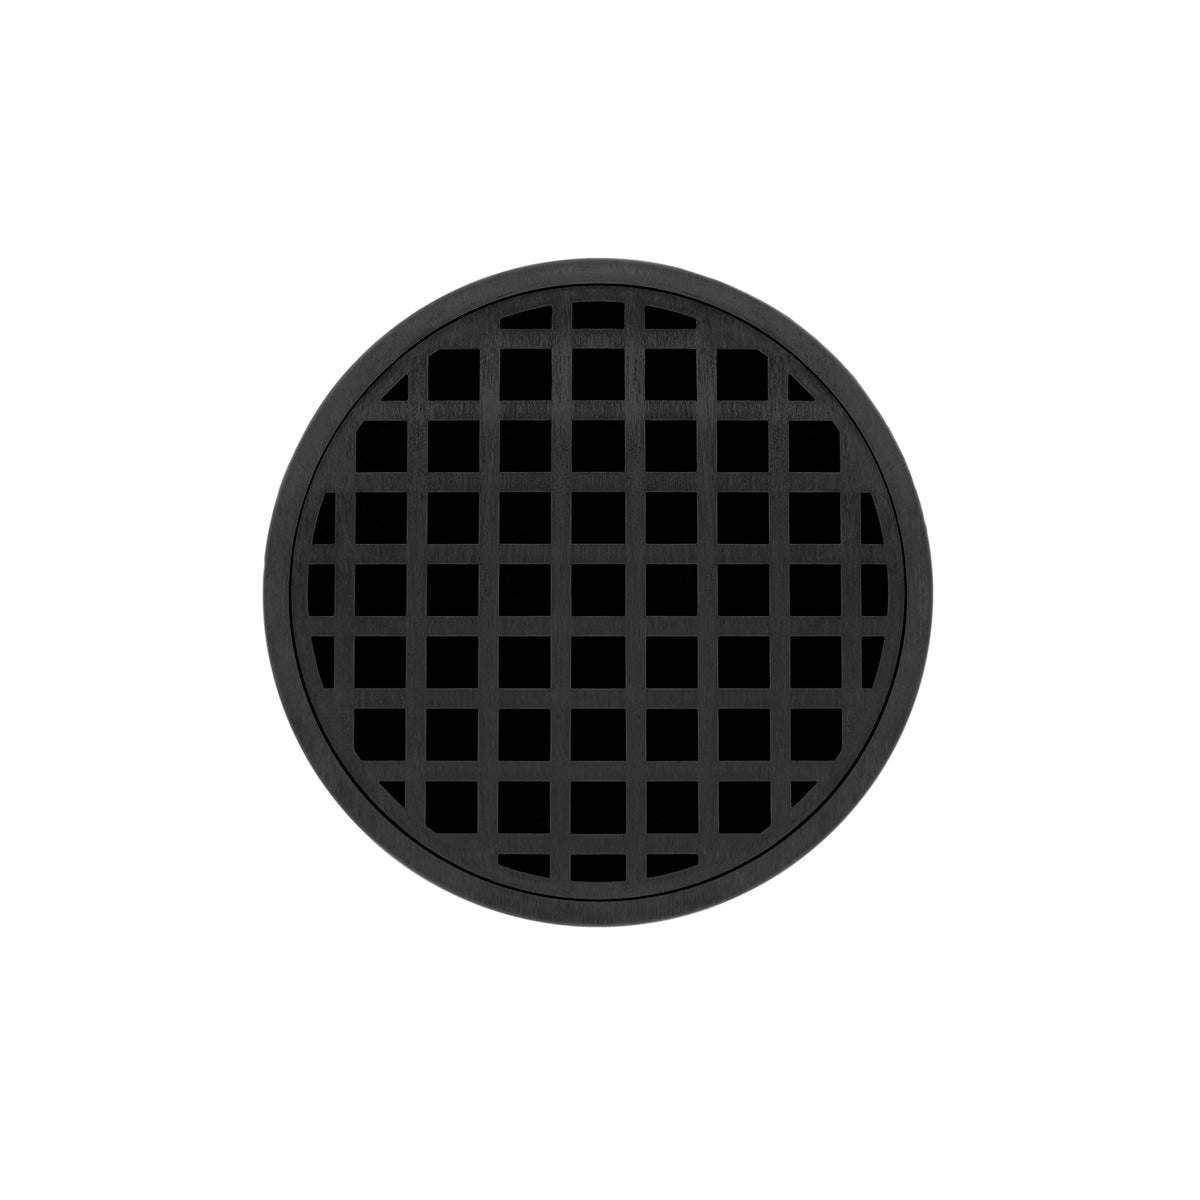 Infinity Drain 5" Round RQDB 5 Premium Center Drain Kit with Squares Pattern Decorative Plate with PVC Bonded Flange Drain Body, 2", 3" and 4" Outlet